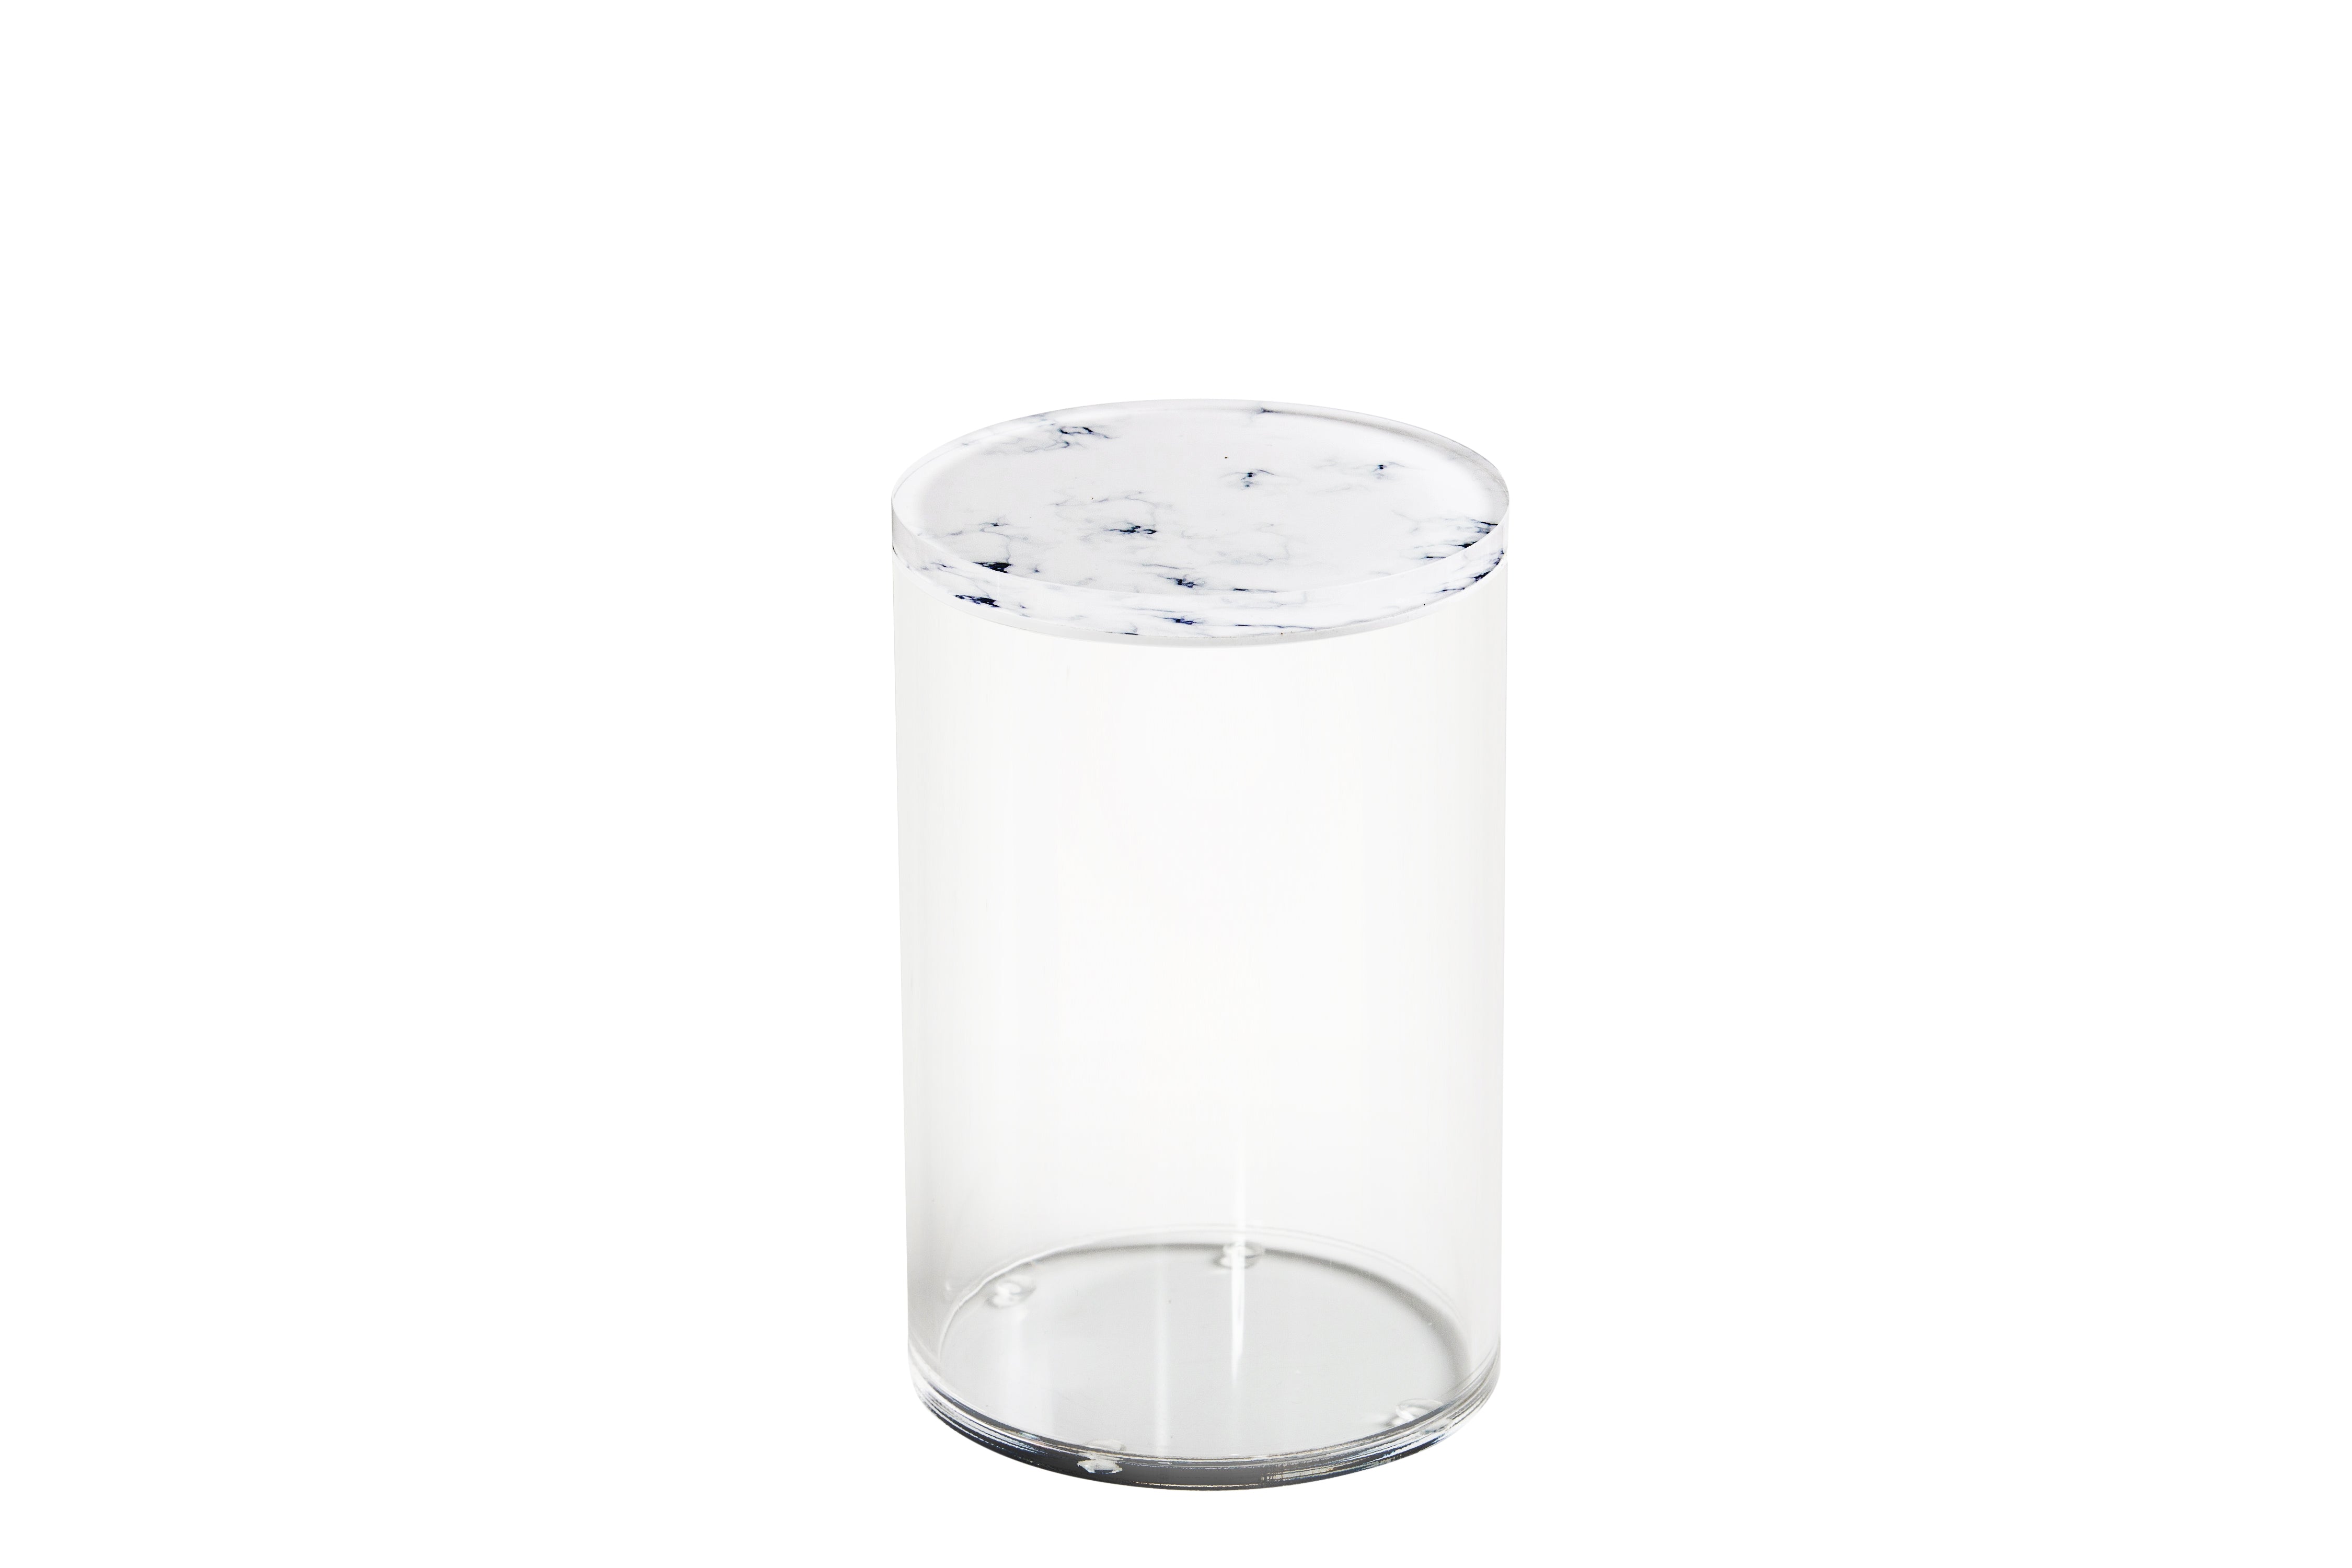 Marble Tones Plexi Container - Tall